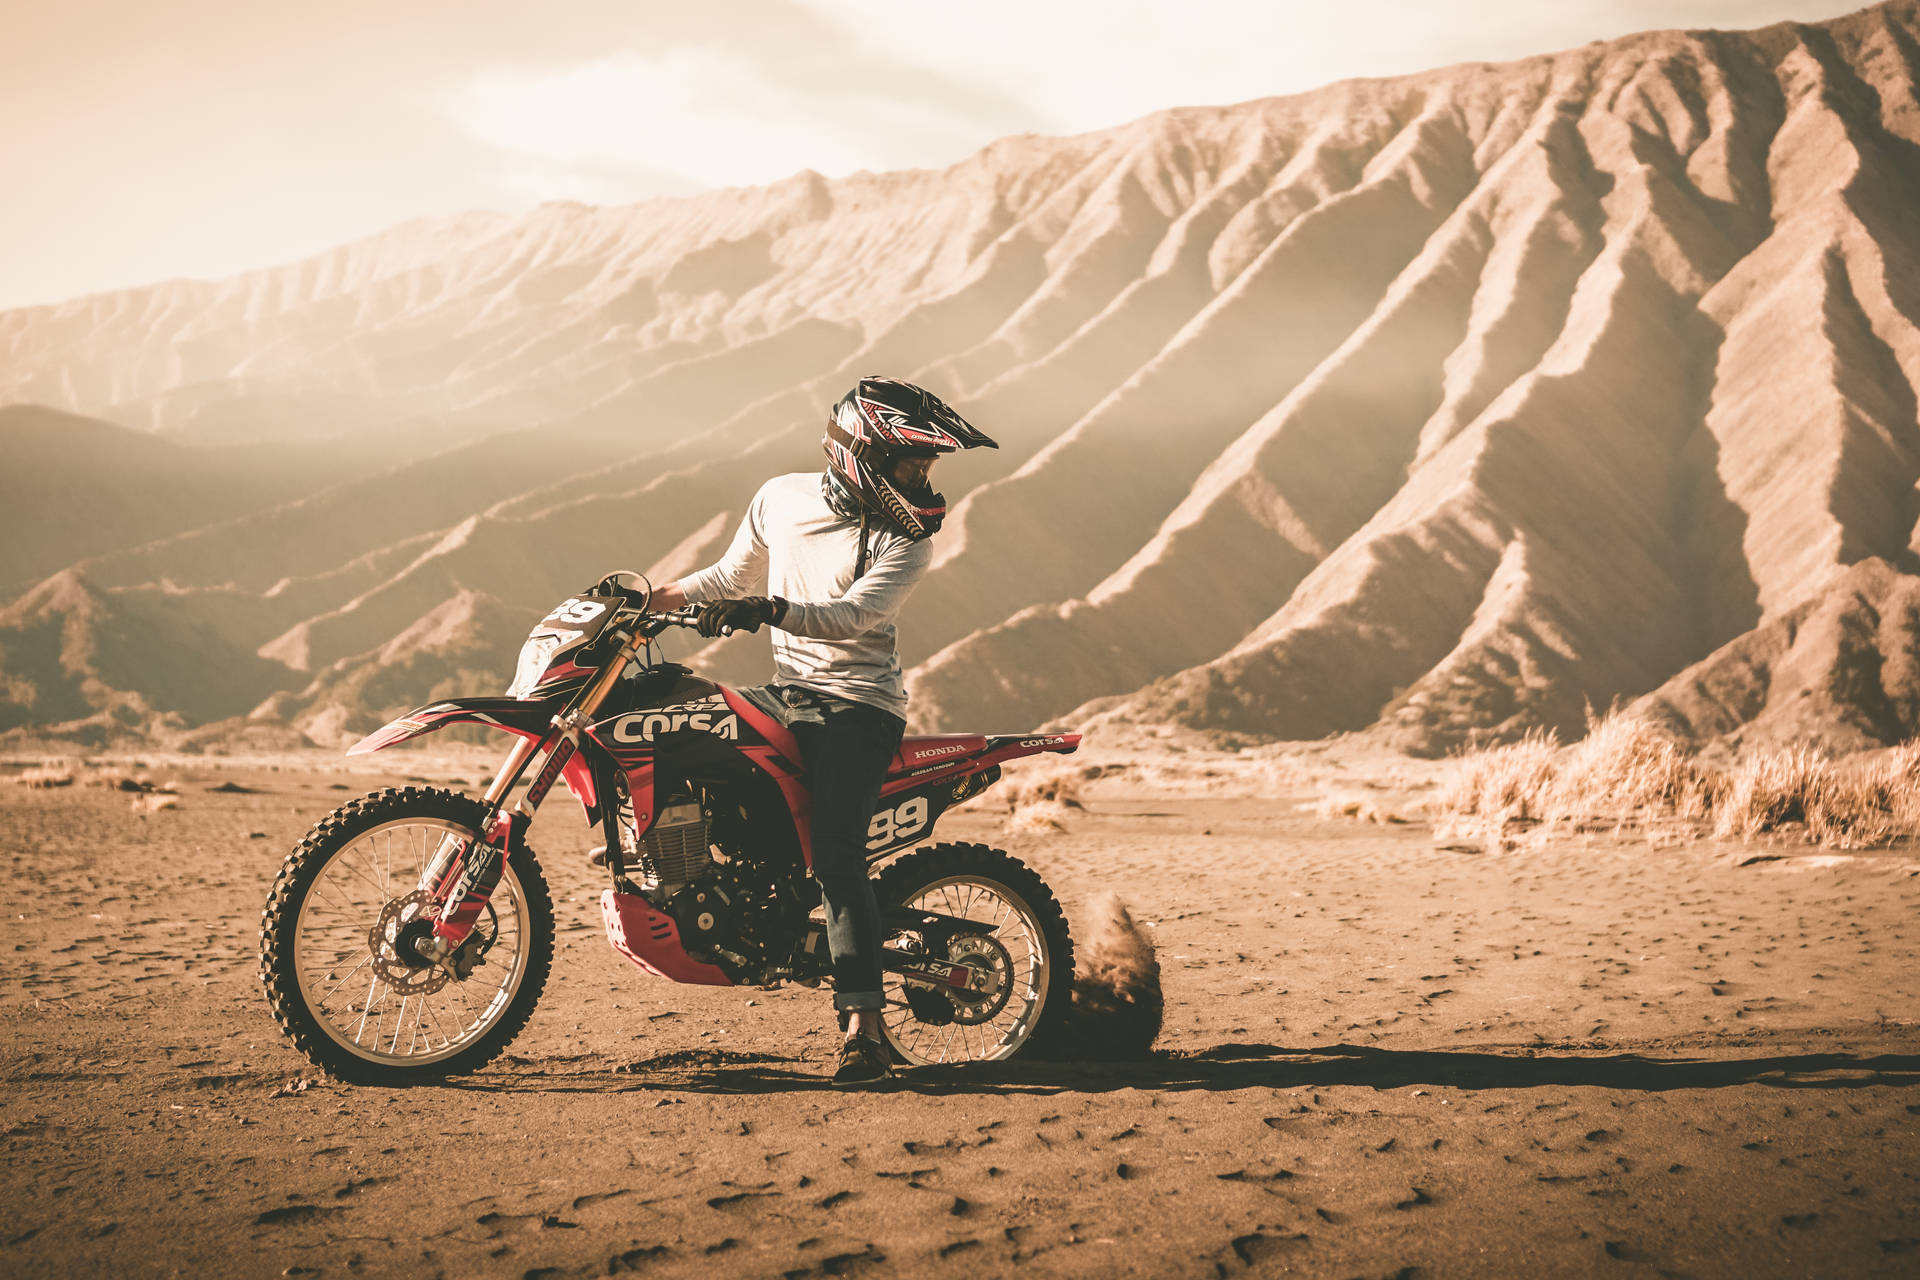 Motorcycle, Cross, Motorcyclist, Mountains, Off-road, Sand, Helmet Background